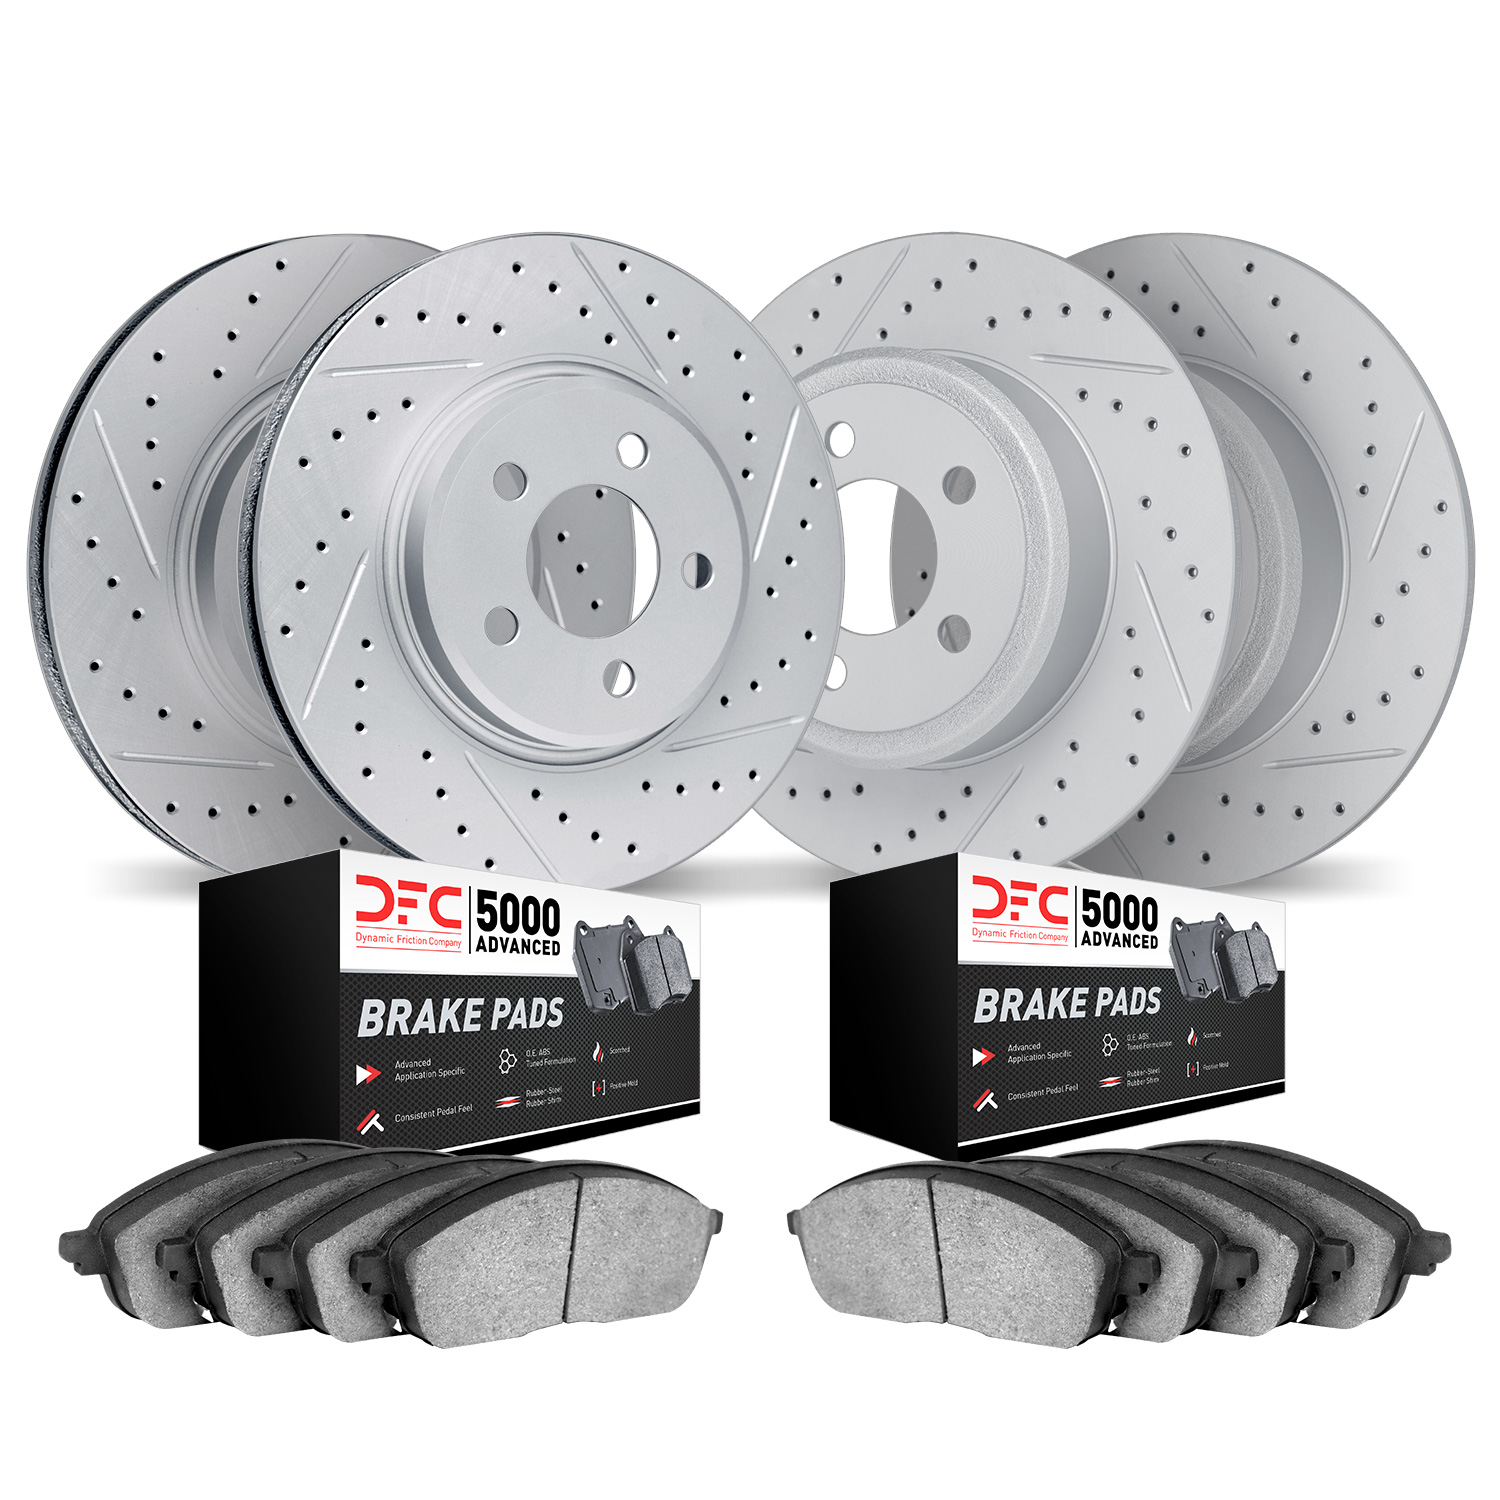 2504-59037 Geoperformance Drilled/Slotted Rotors w/5000 Advanced Brake Pads Kit, 2016-2016 Acura/Honda, Position: Front and Rear